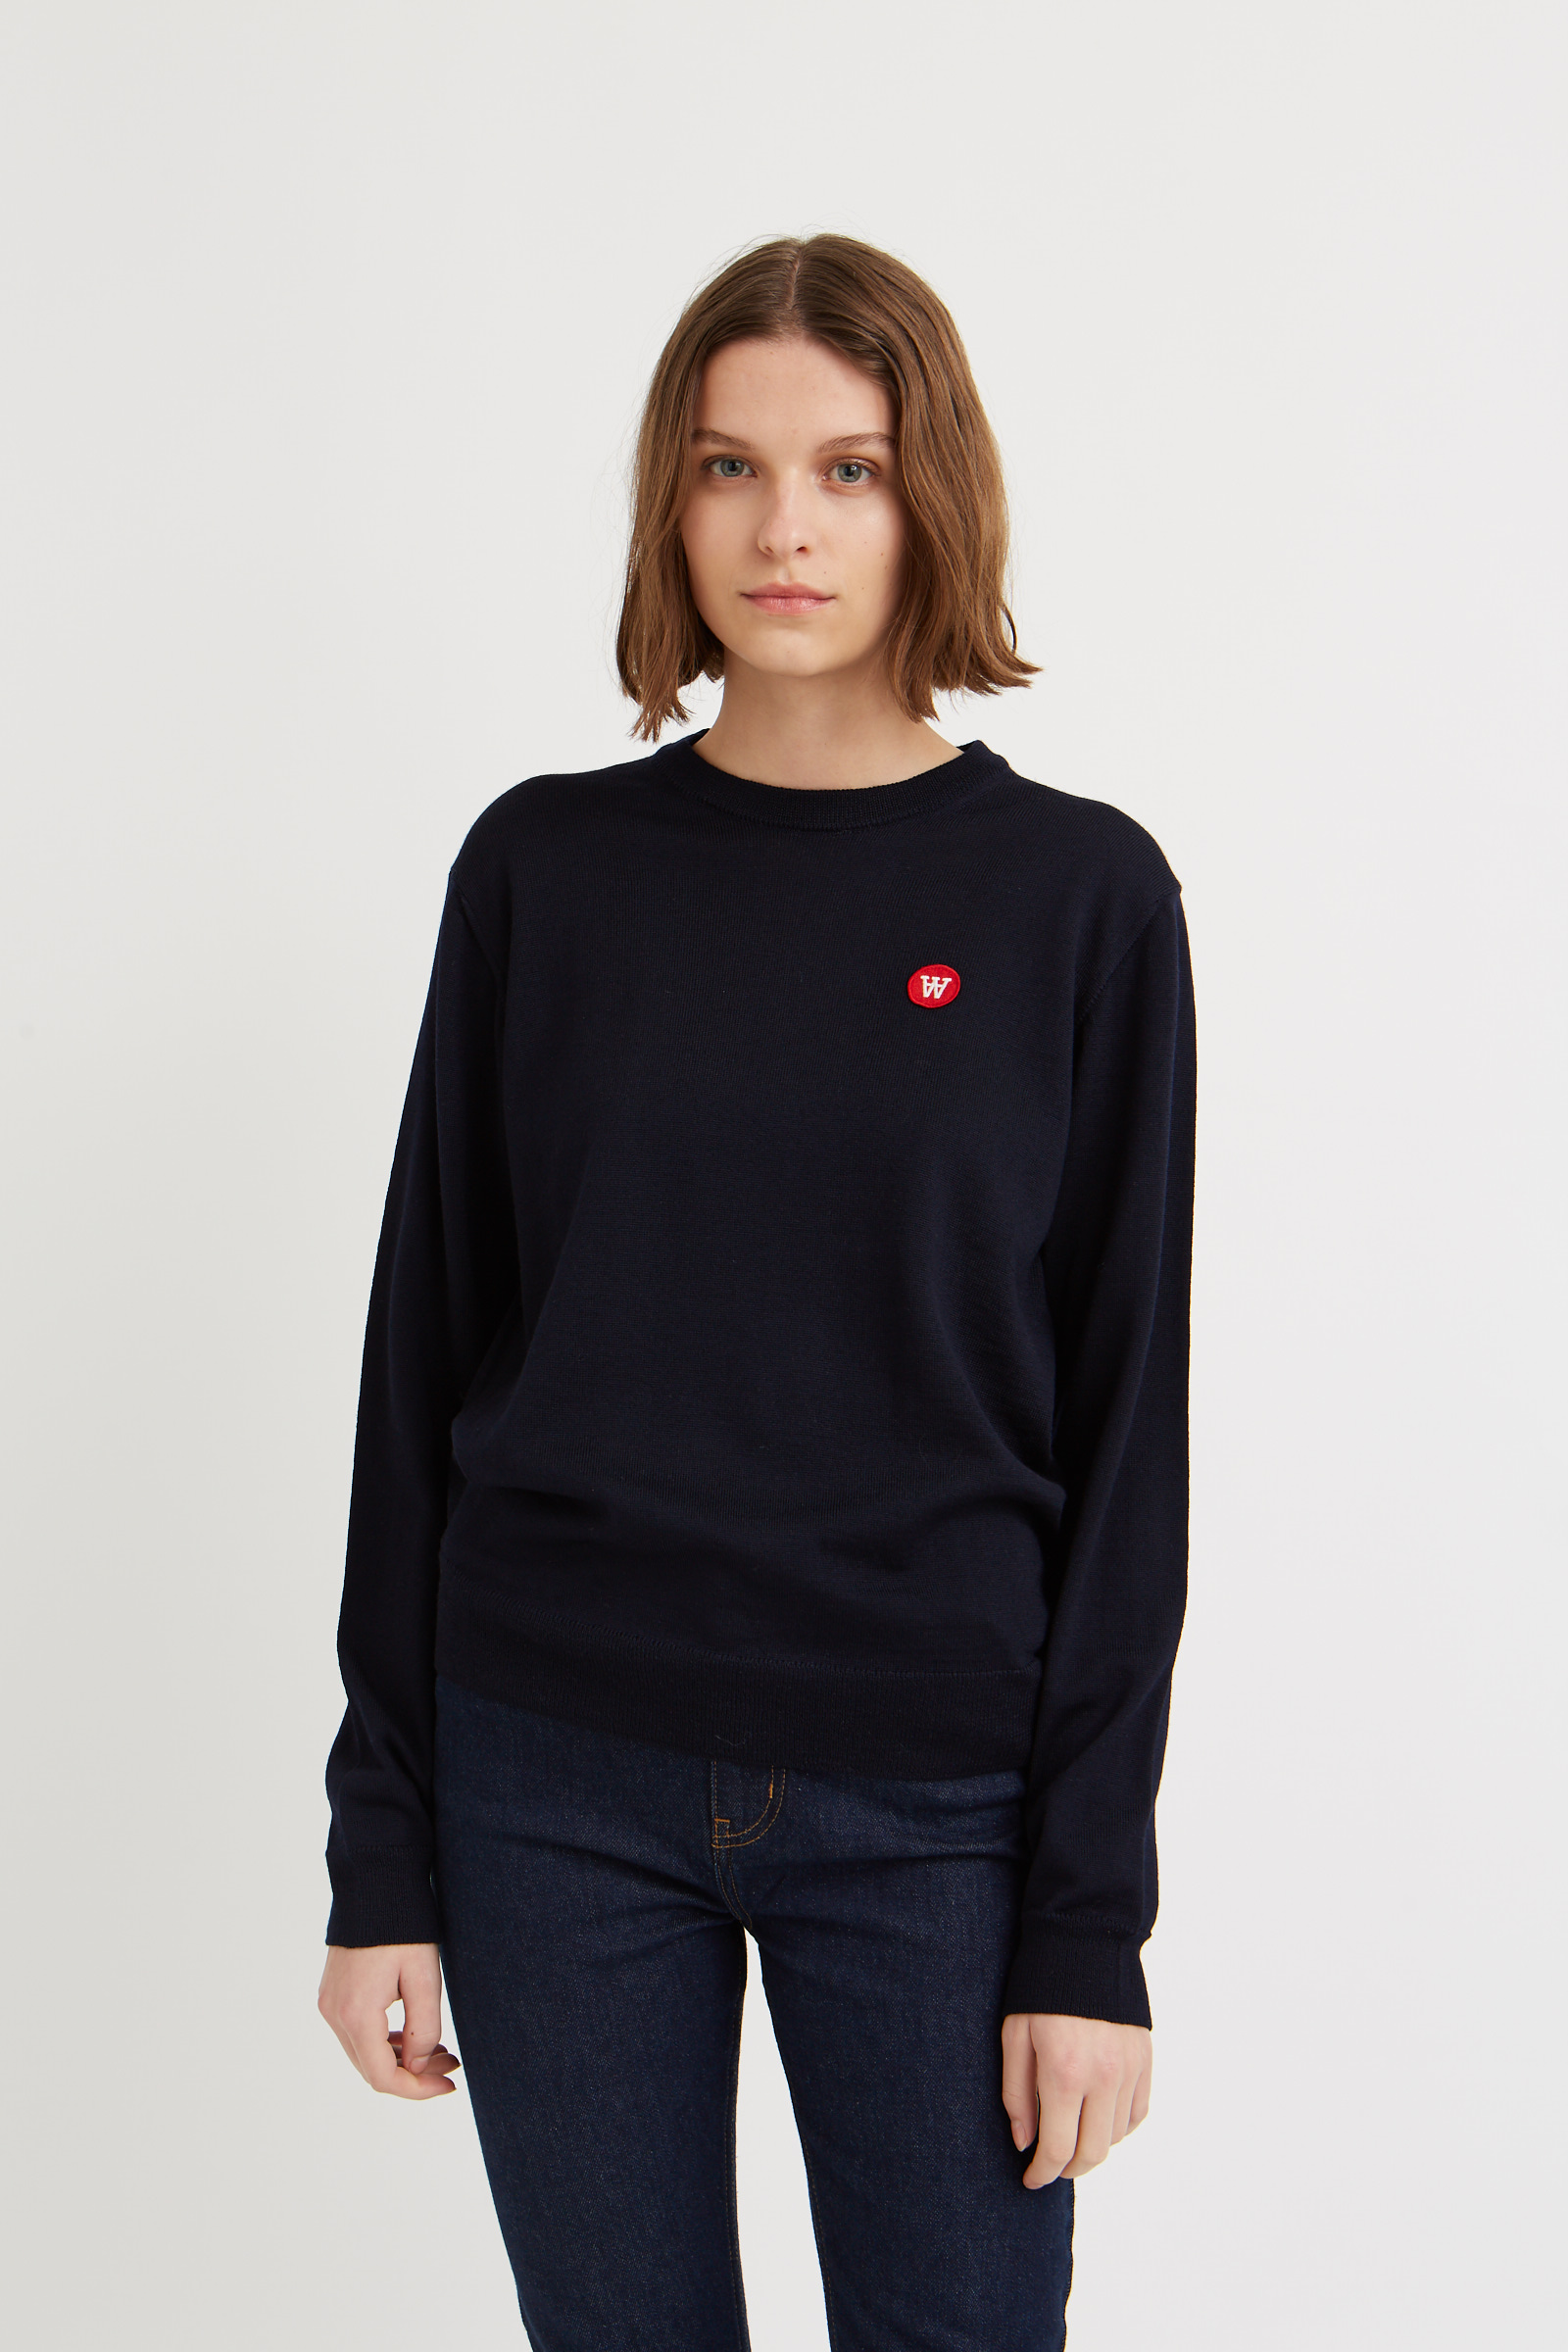 Double A by Wood Wood Lyn crewneck Navy | WoodWood.com